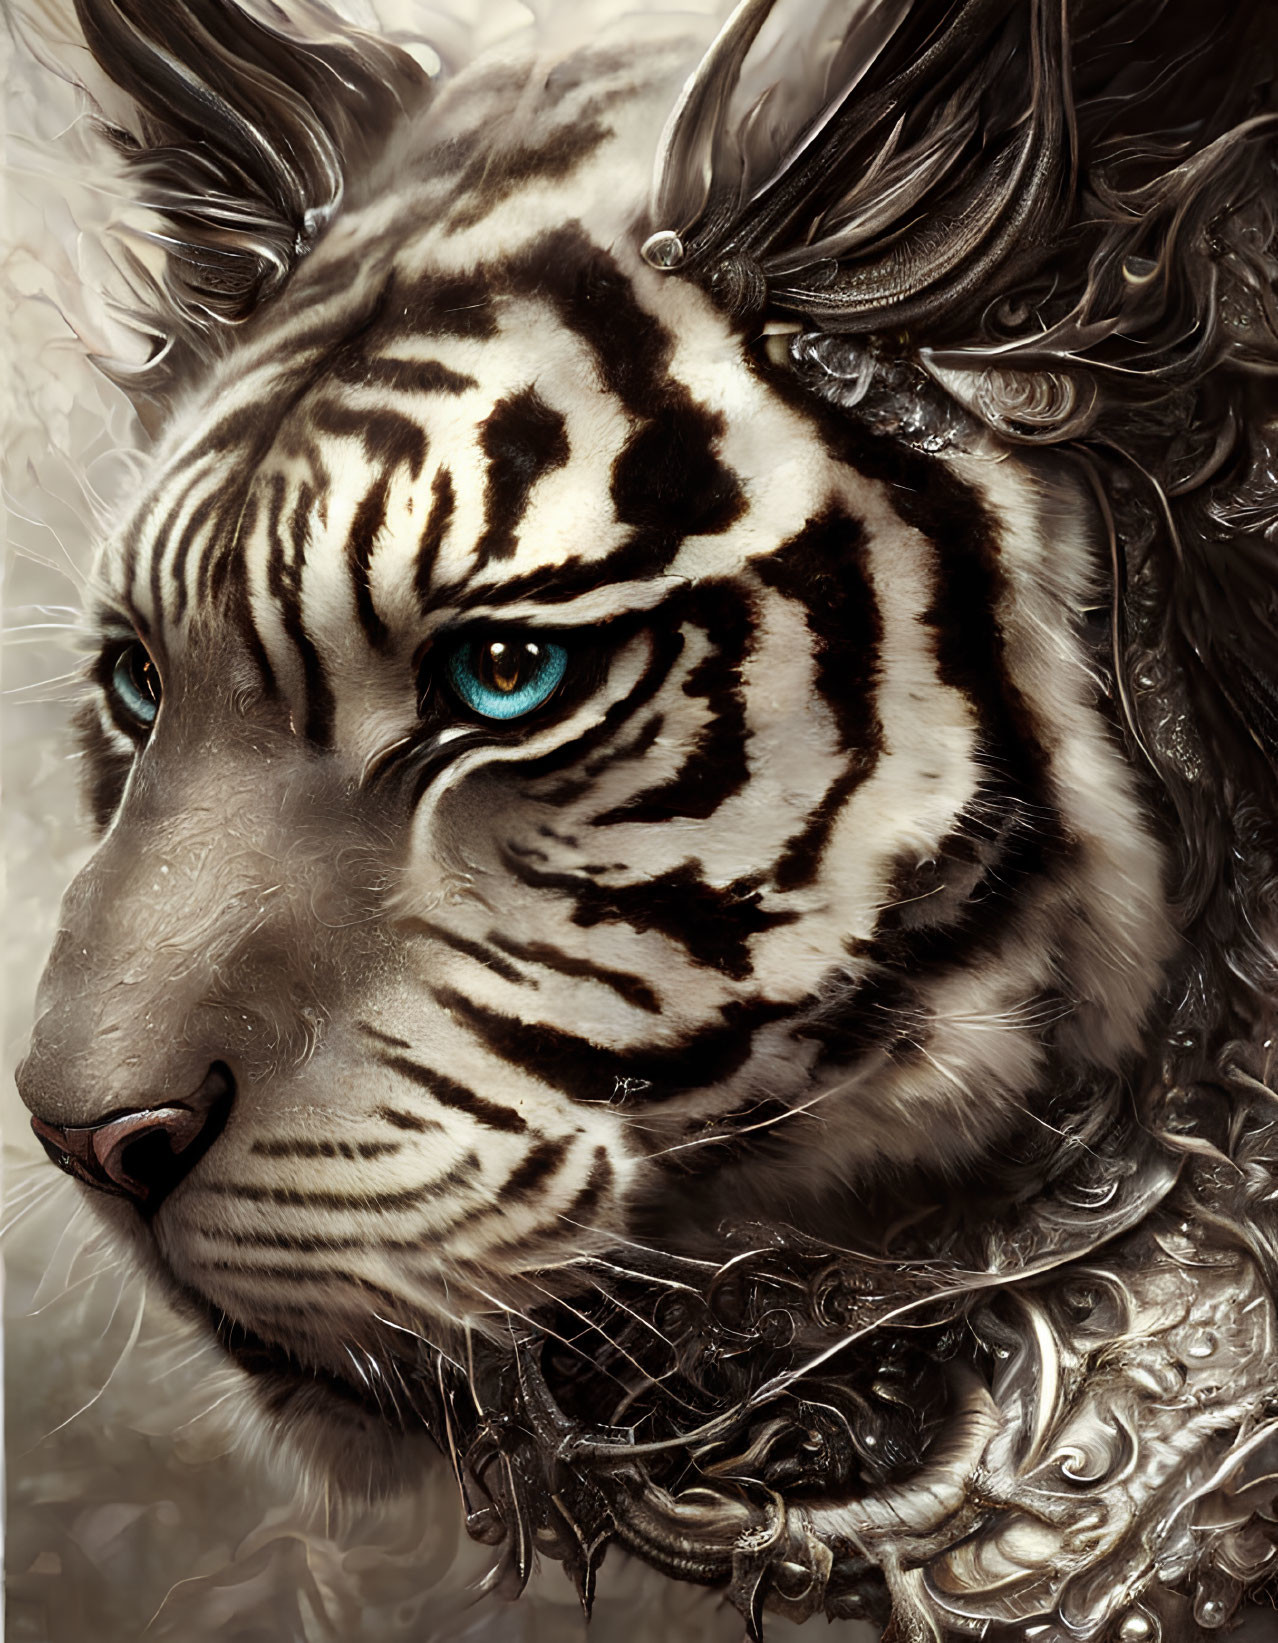 Detailed White Tiger Illustration with Blue Eyes and Ornate Armor